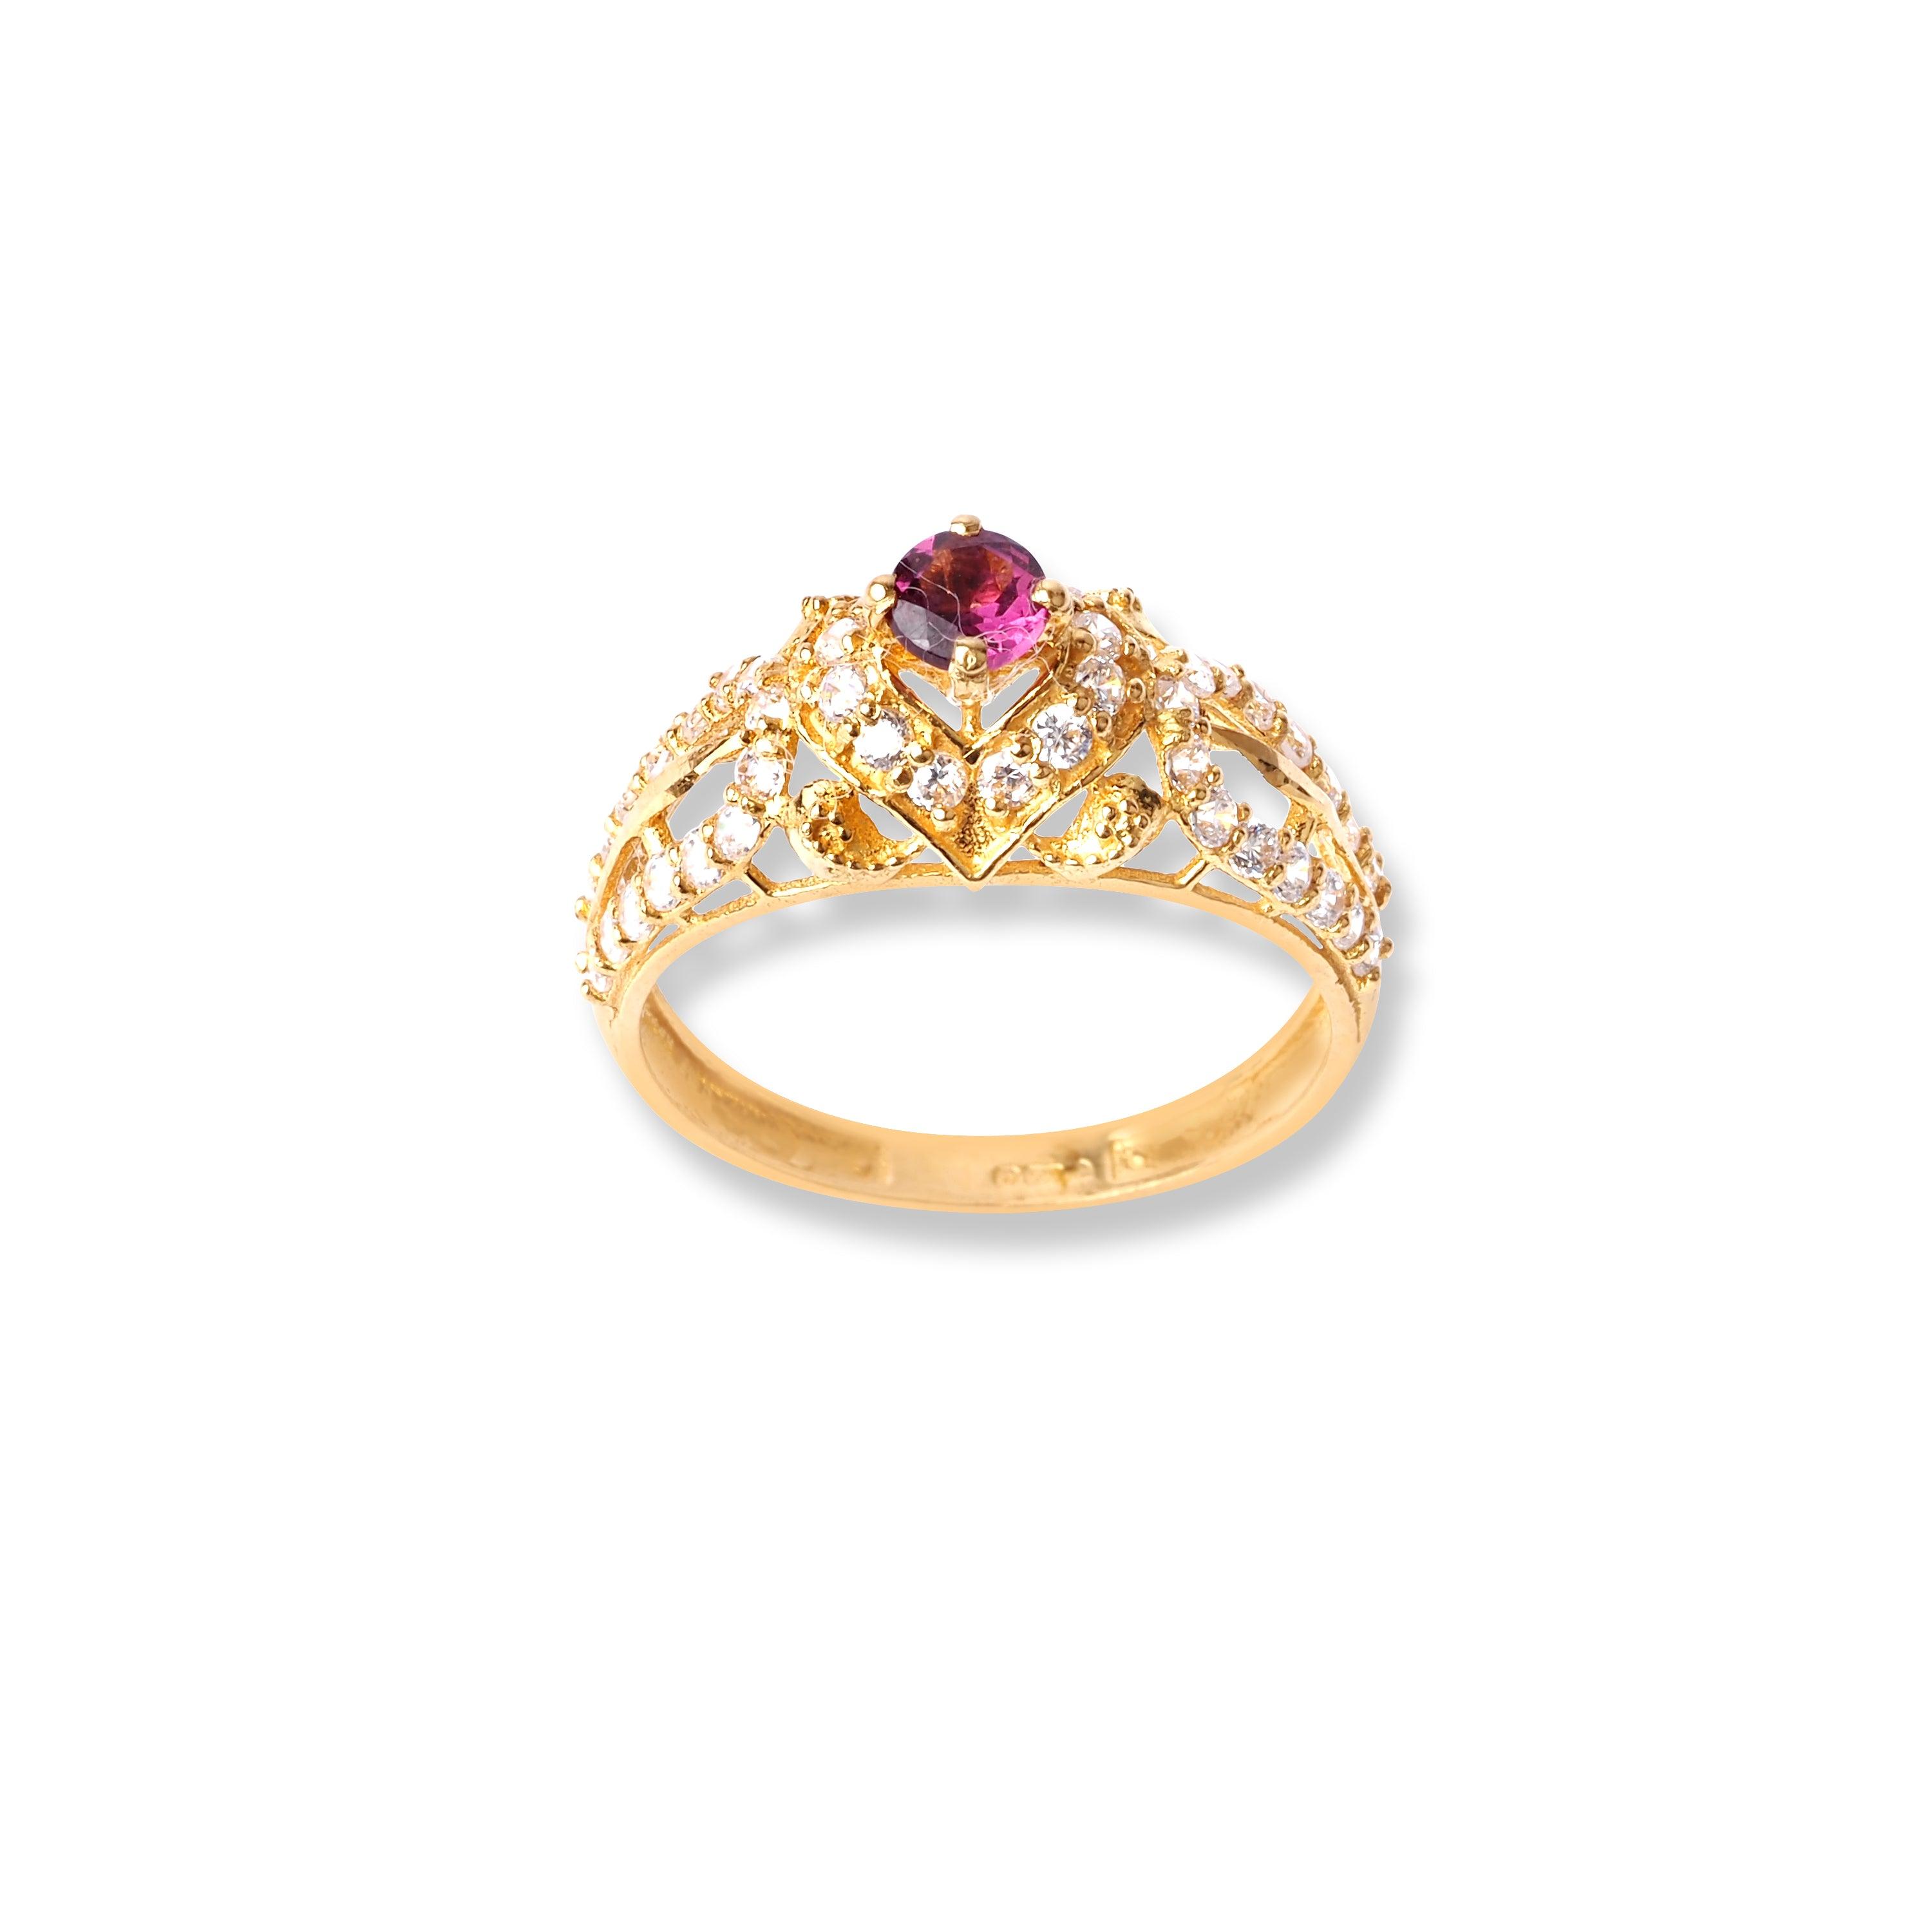 22ct Yellow Gold Ring with Pink & White Cubic Zirconia Stones (2.8g) LR-6583 - Minar Jewellers